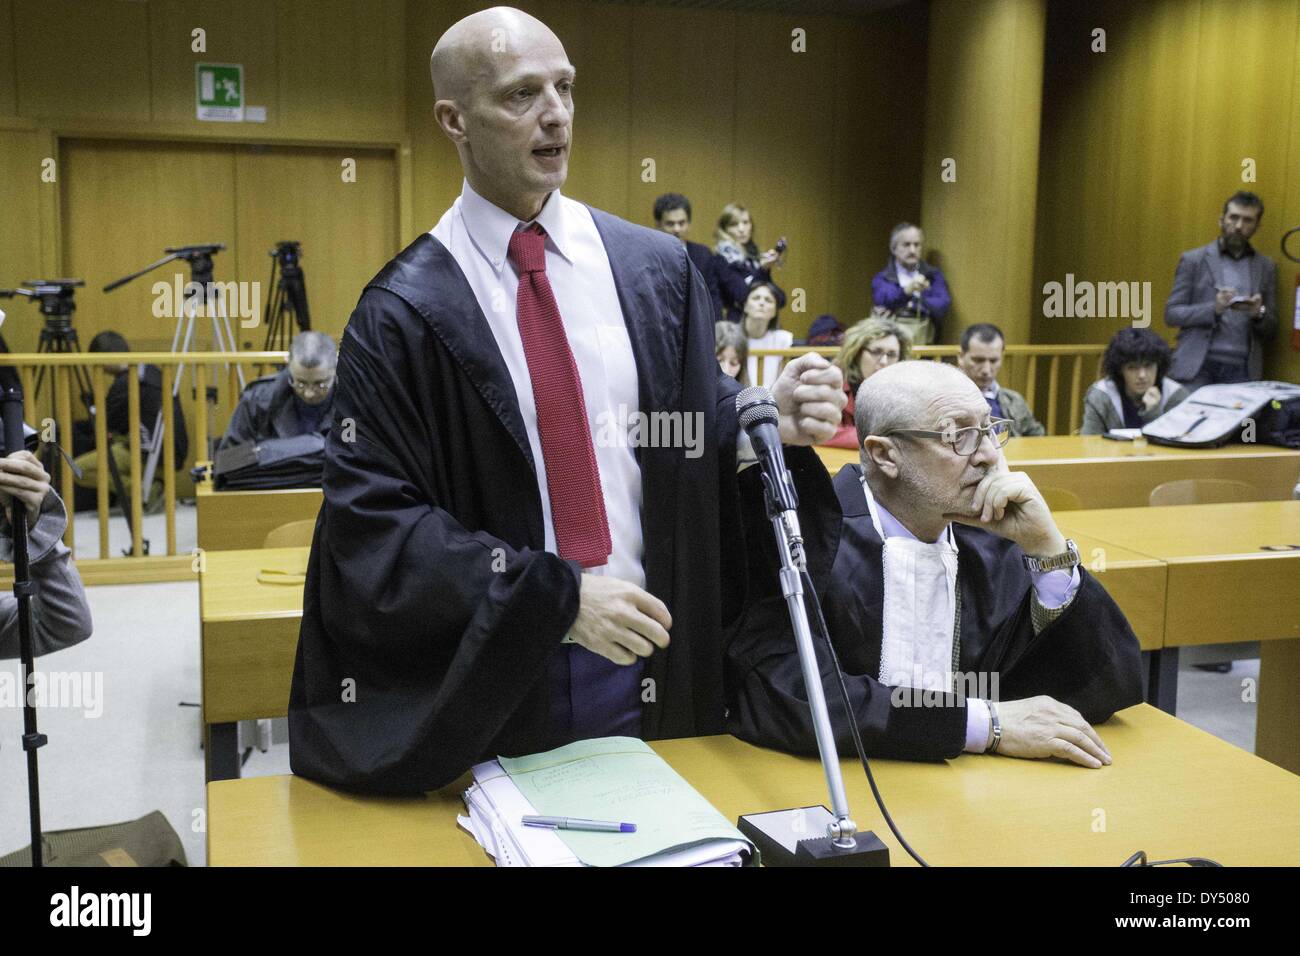 Turin, Italy. 3rd Apr, 2014. The lawyer Liborio Cataliotti defender of Davide Vannoni of Stamina Foundation speaks during the process held in Turin, on April 3, 2014. © Mauro Ujetto/NurPhoto/ZUMAPRESS.com/Alamy Live News Stock Photo